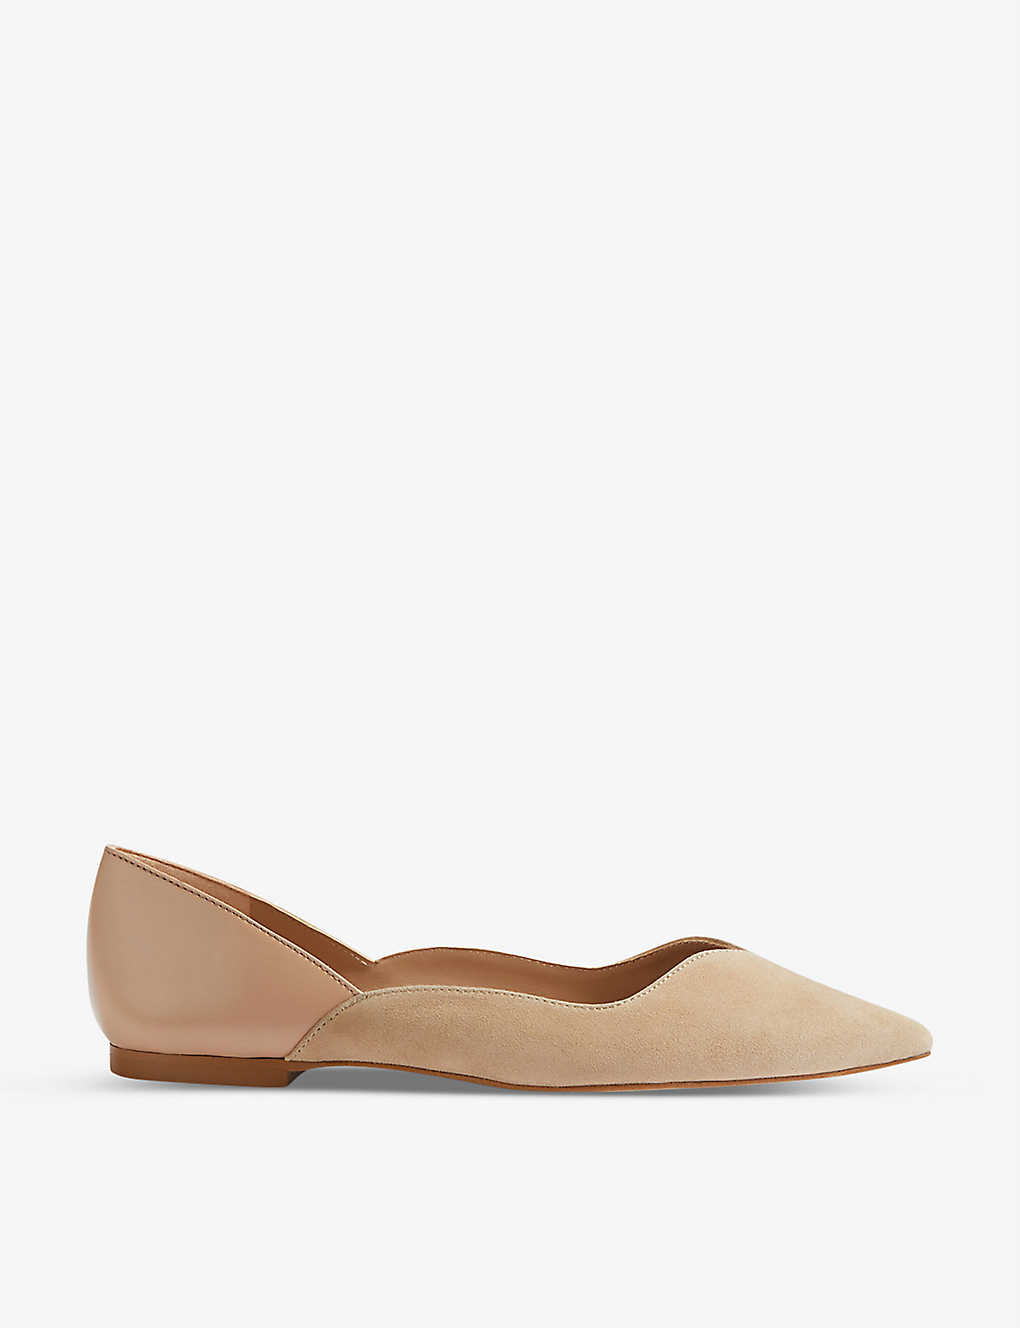 Lk Bennett Iris Pointed Leather Ballet Flats In Bei-trench